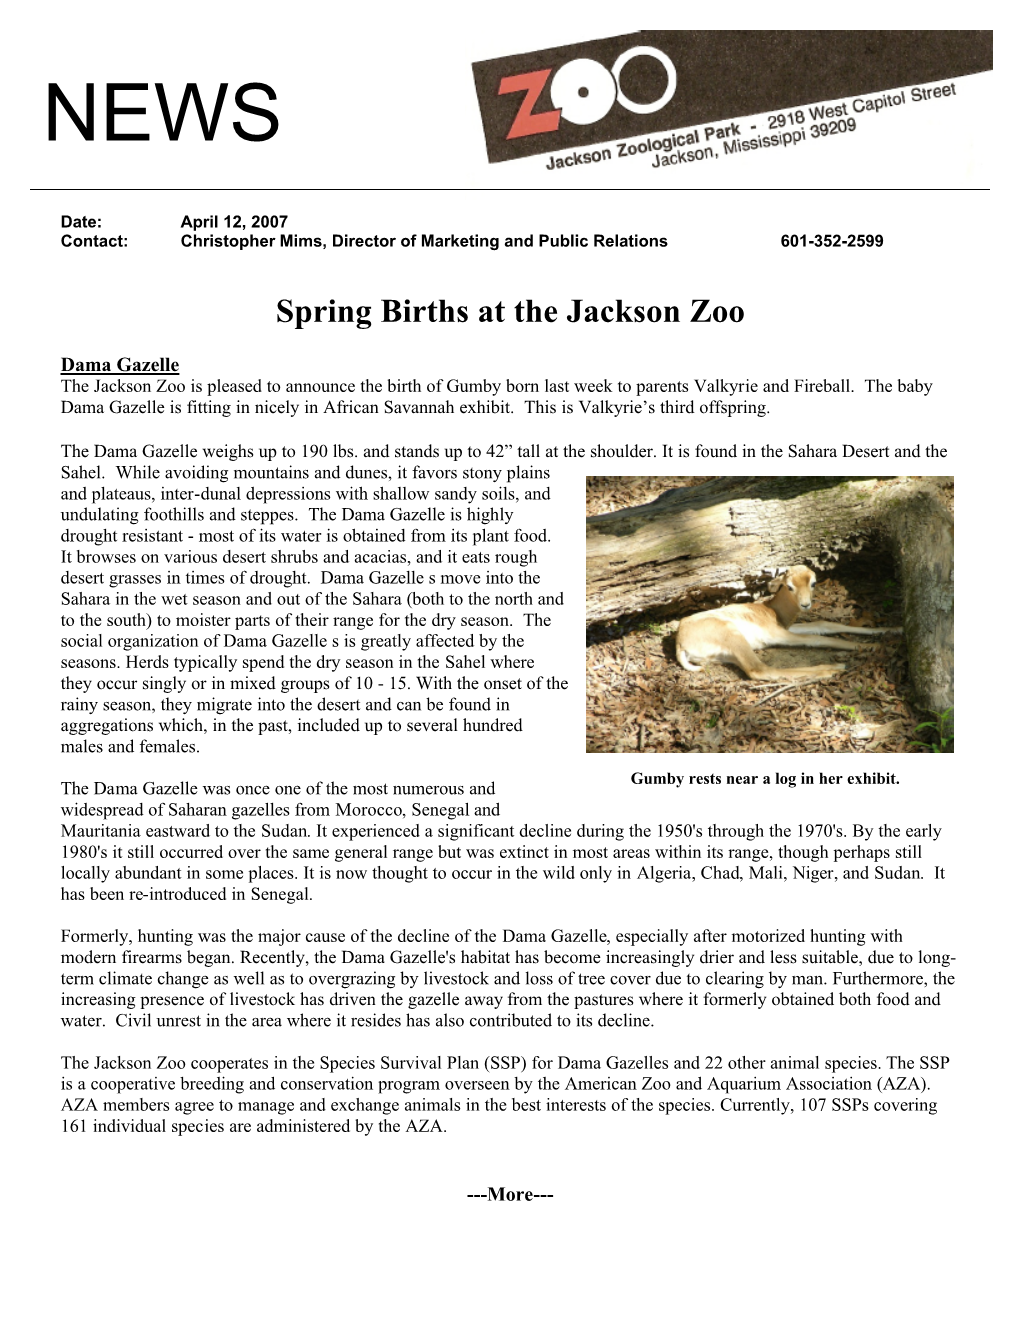 Spring Births at the Jackson Zoo